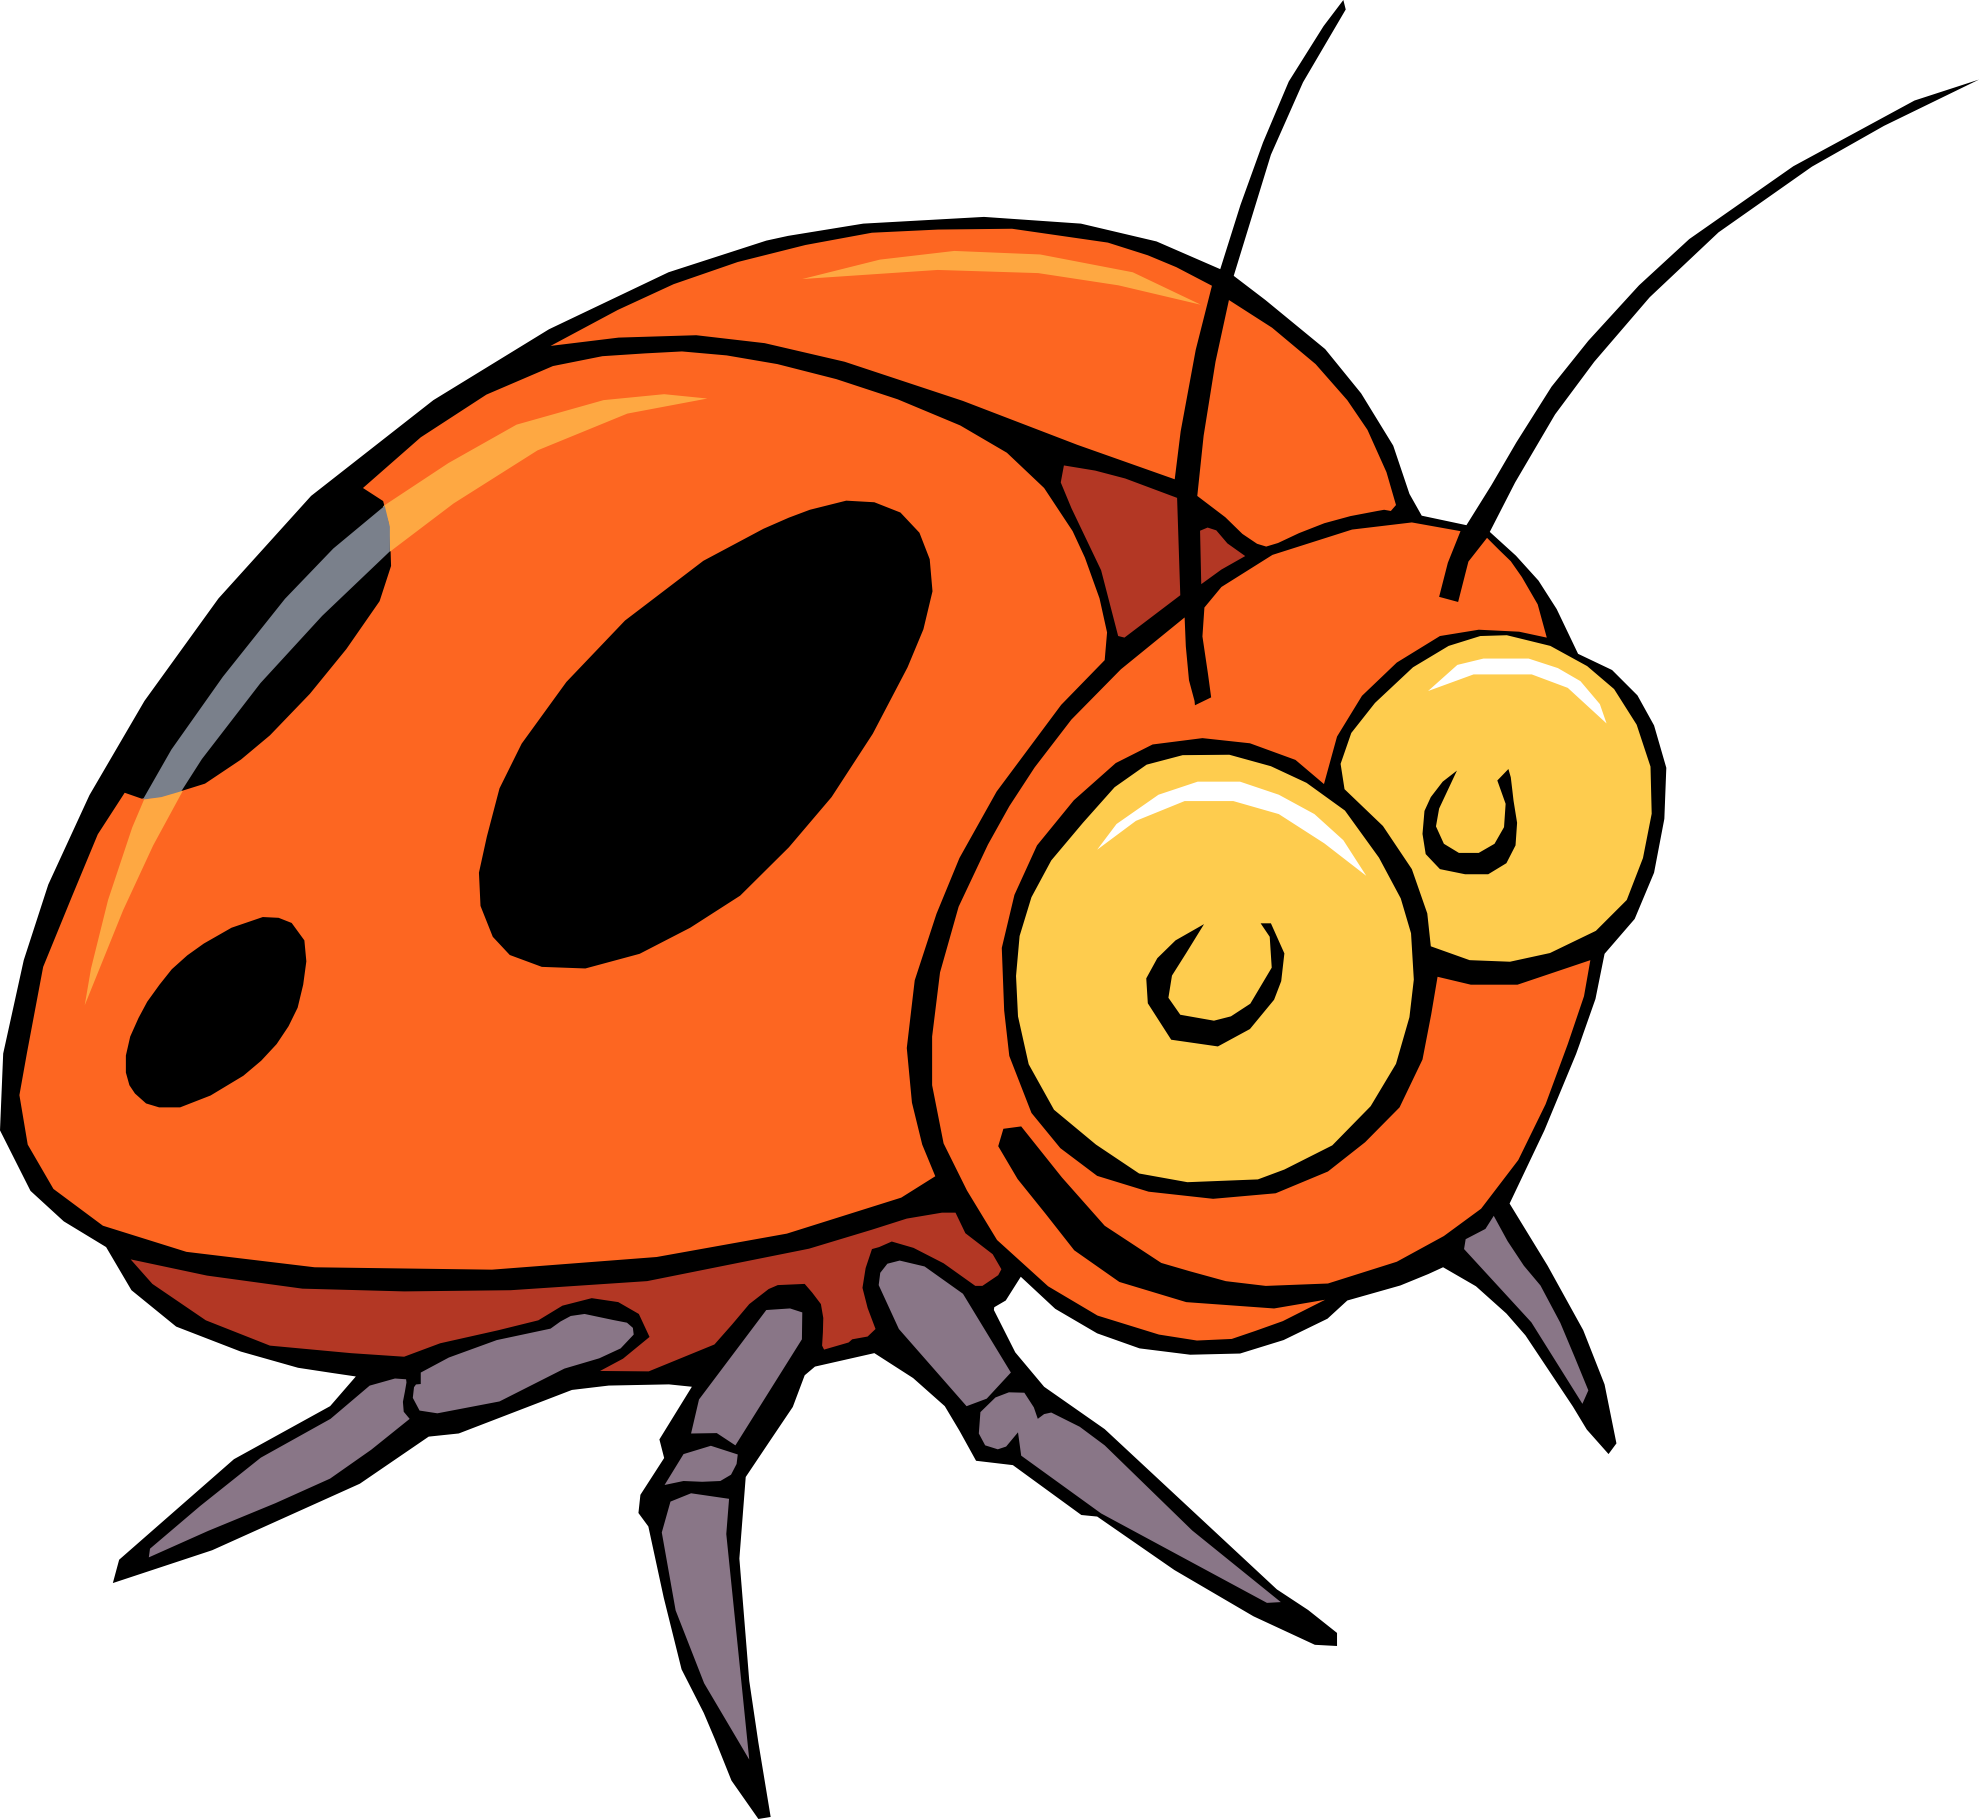 Insect Clip Art Free - Clipart library